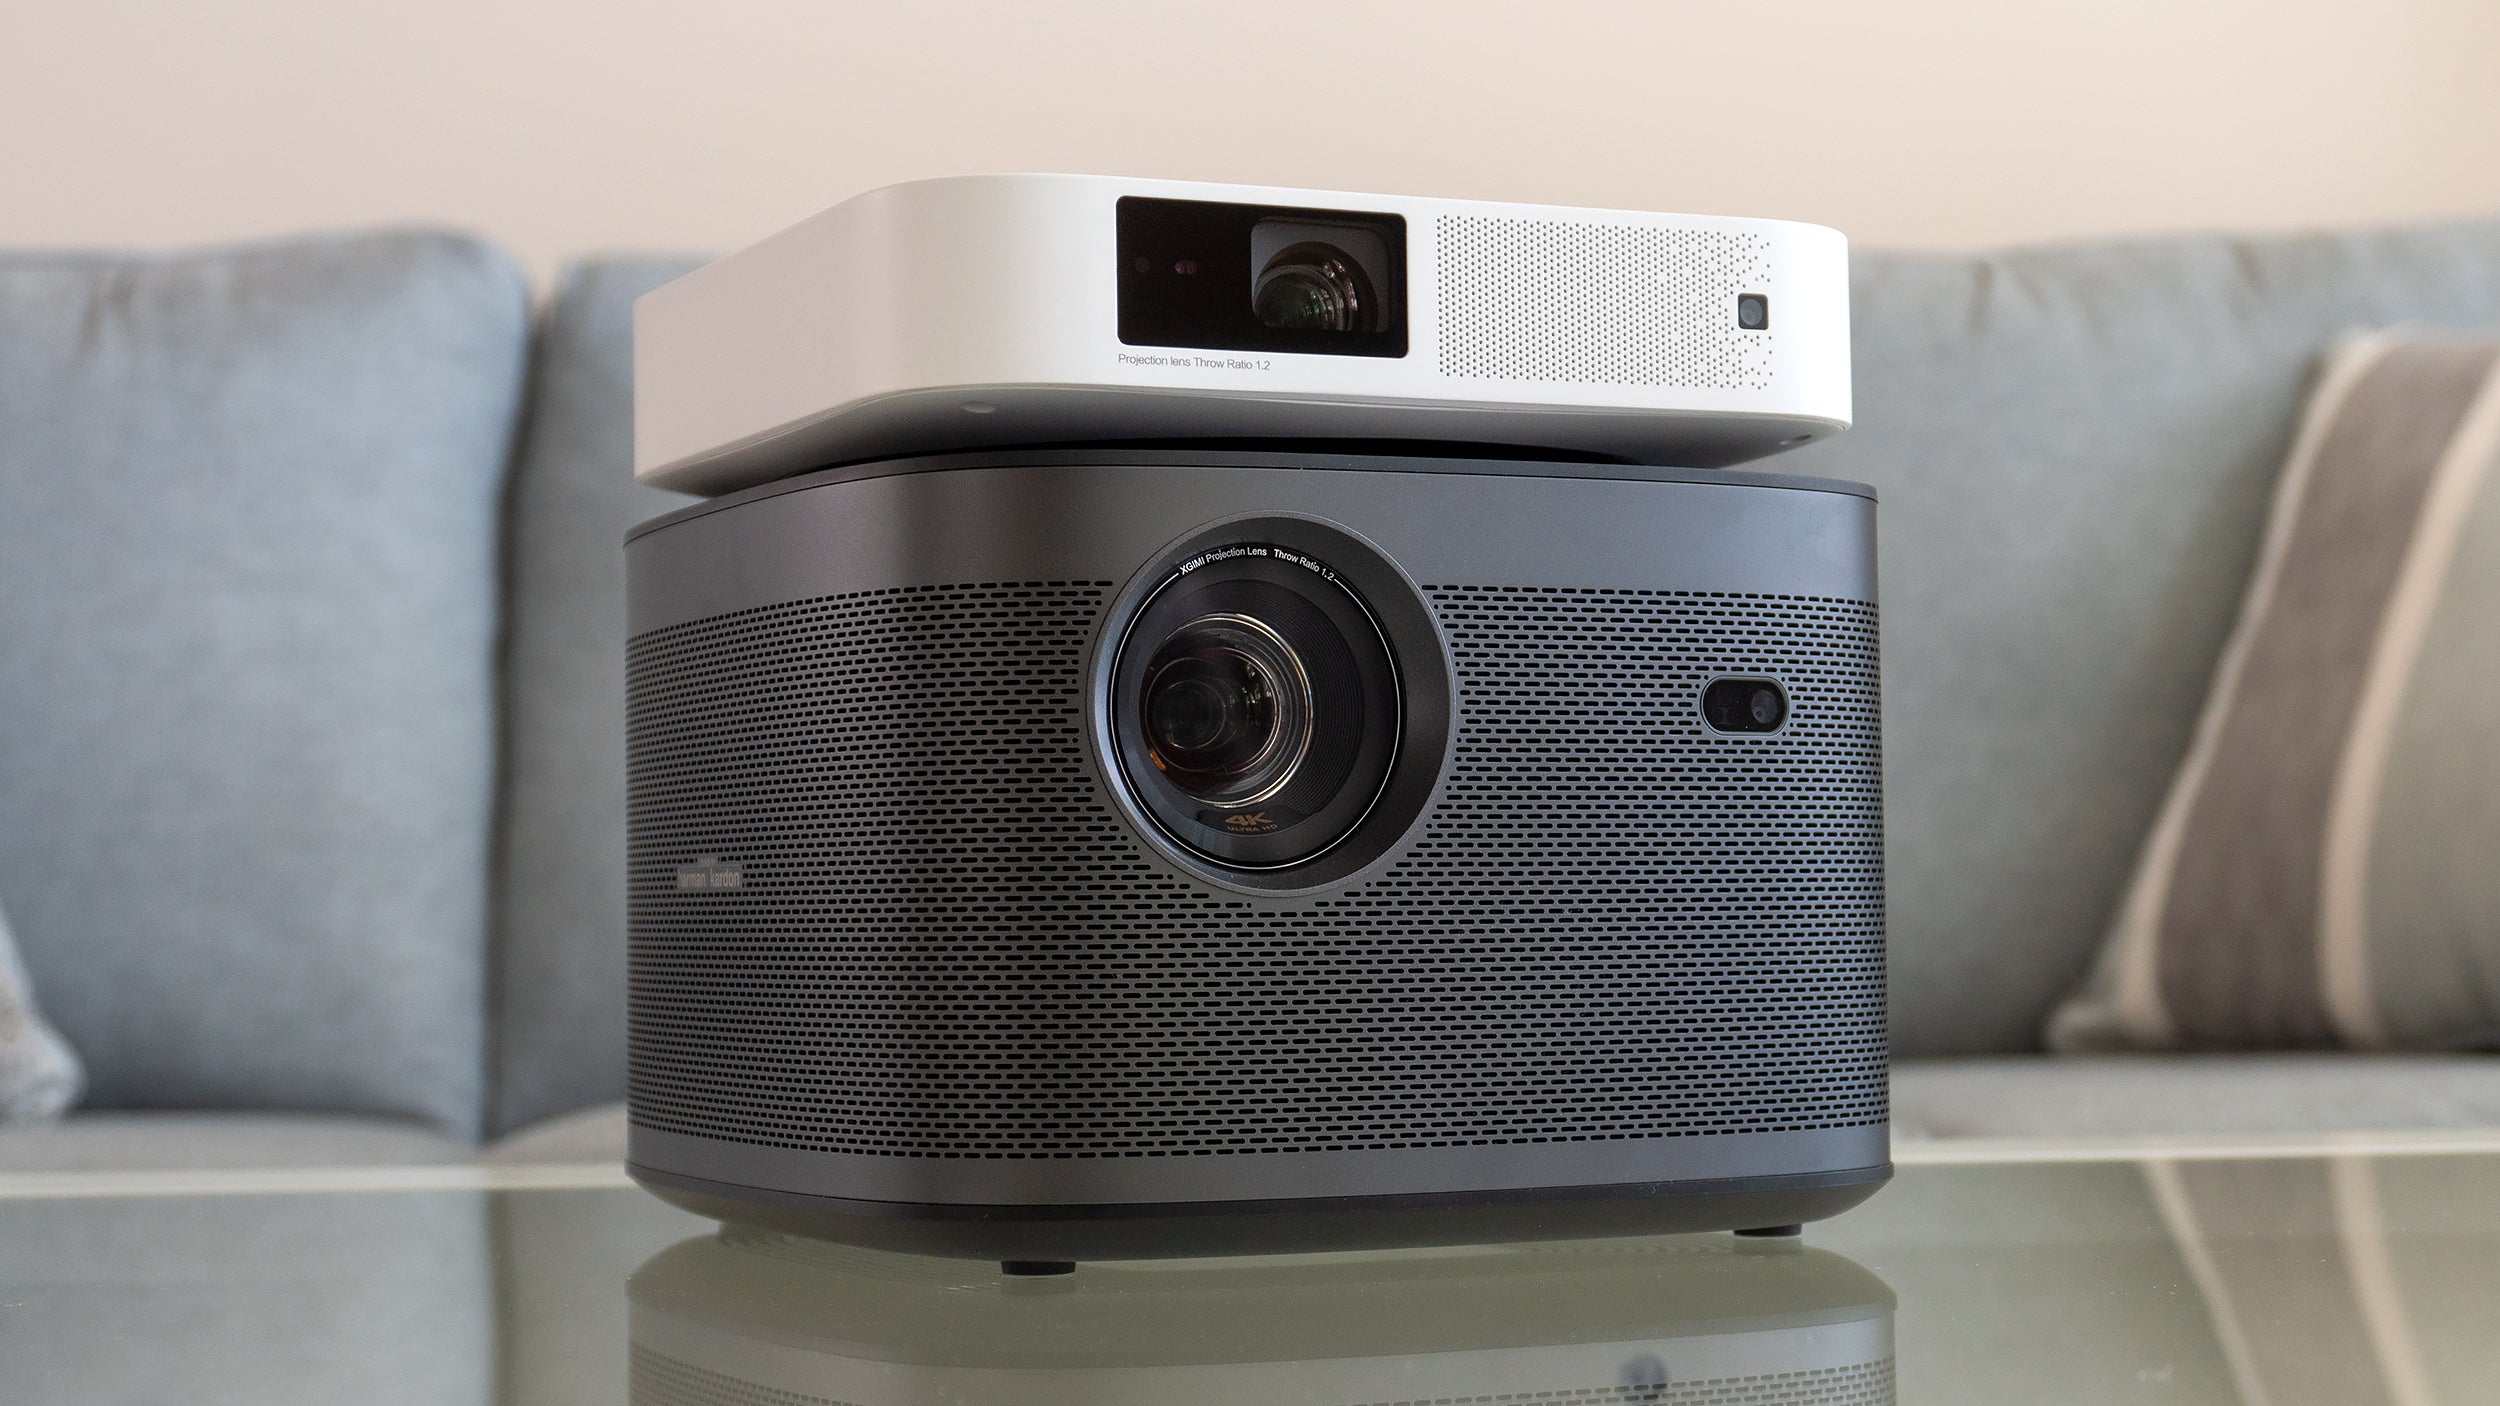 The XGIMI Elfin is quite a bit smaller than the 4K XGIMI Horizon Pro projector, and noticeably lighter at just two pounds. (Photo: Andrew Liszewski - Gizmodo)